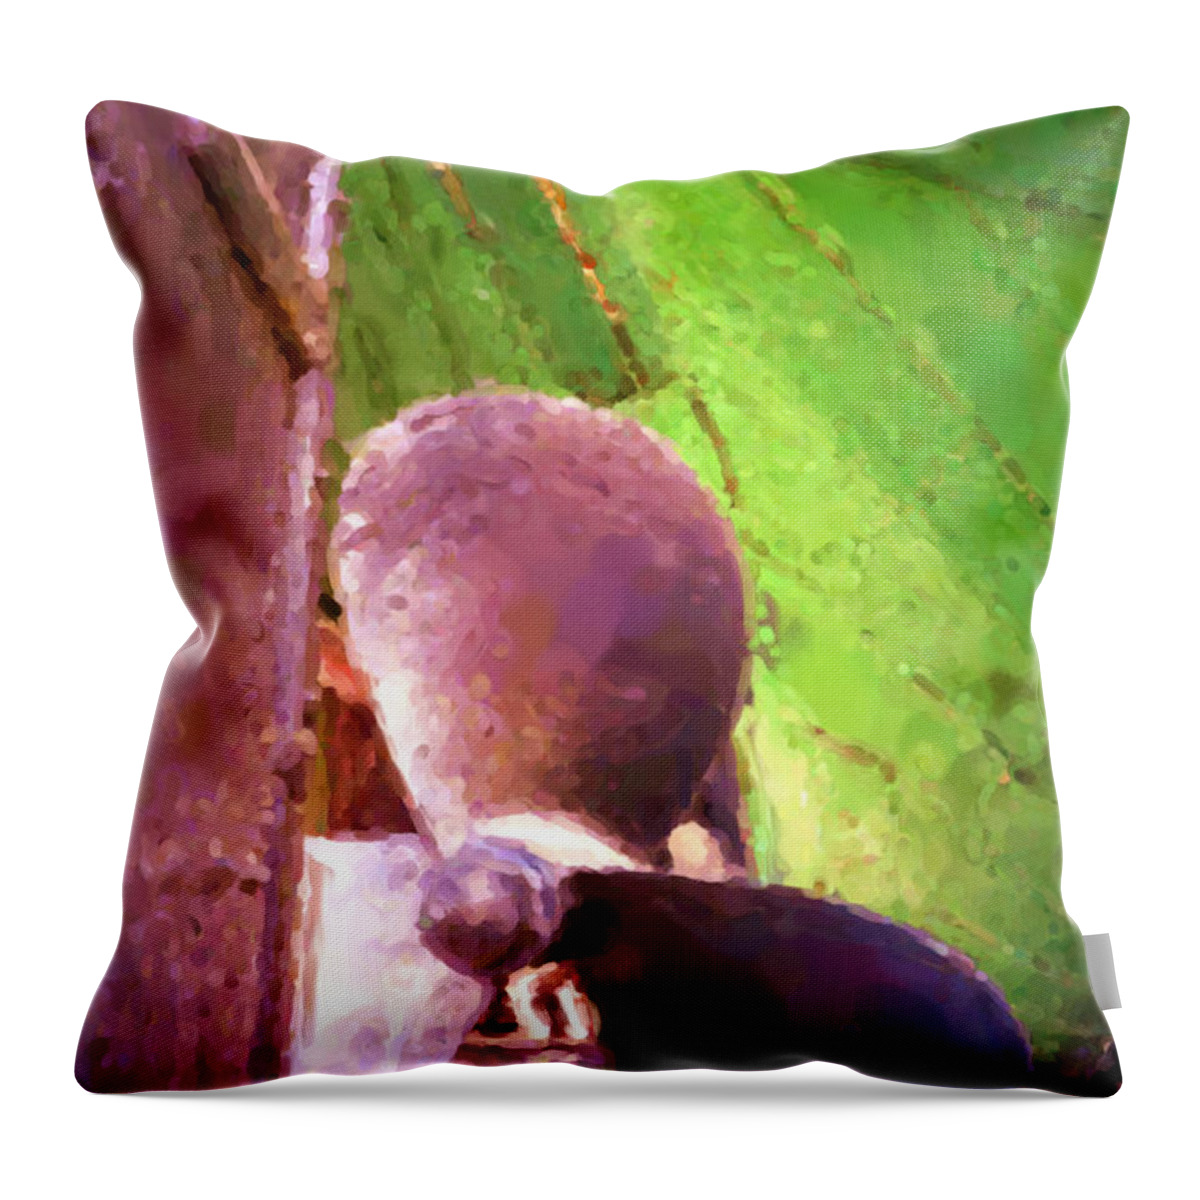 Drydock Throw Pillow featuring the mixed media Drydock by Richard Rizzo